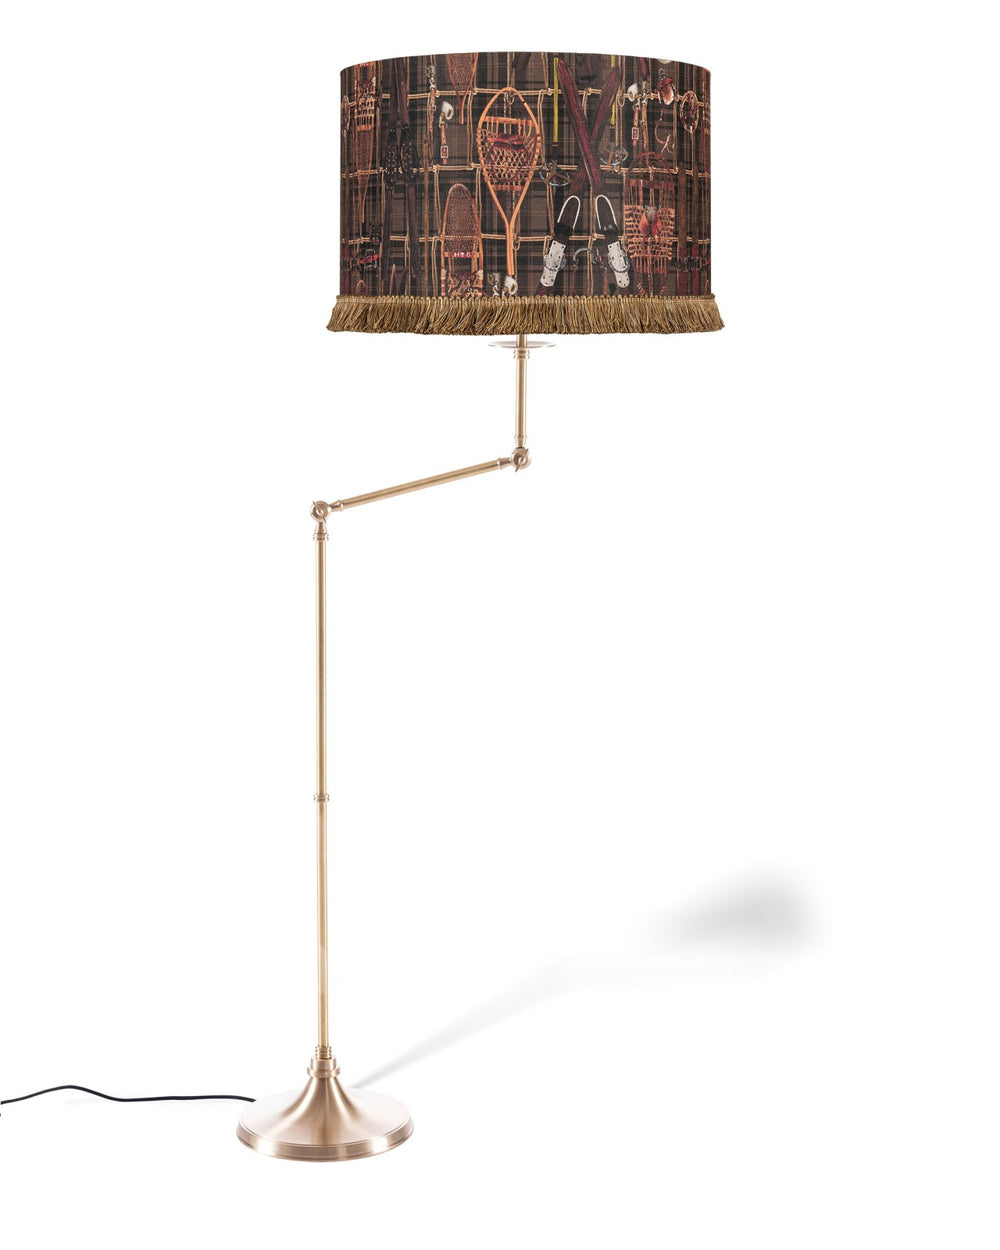 mind-the-gap-tyrol-collection-vintage-skiing-drum-lampshade-snowshoes-retro-linein-printed-fringed-standard-lamp-shade-brown-chalet-style-cabin-look-apres-ski-alpine-decor